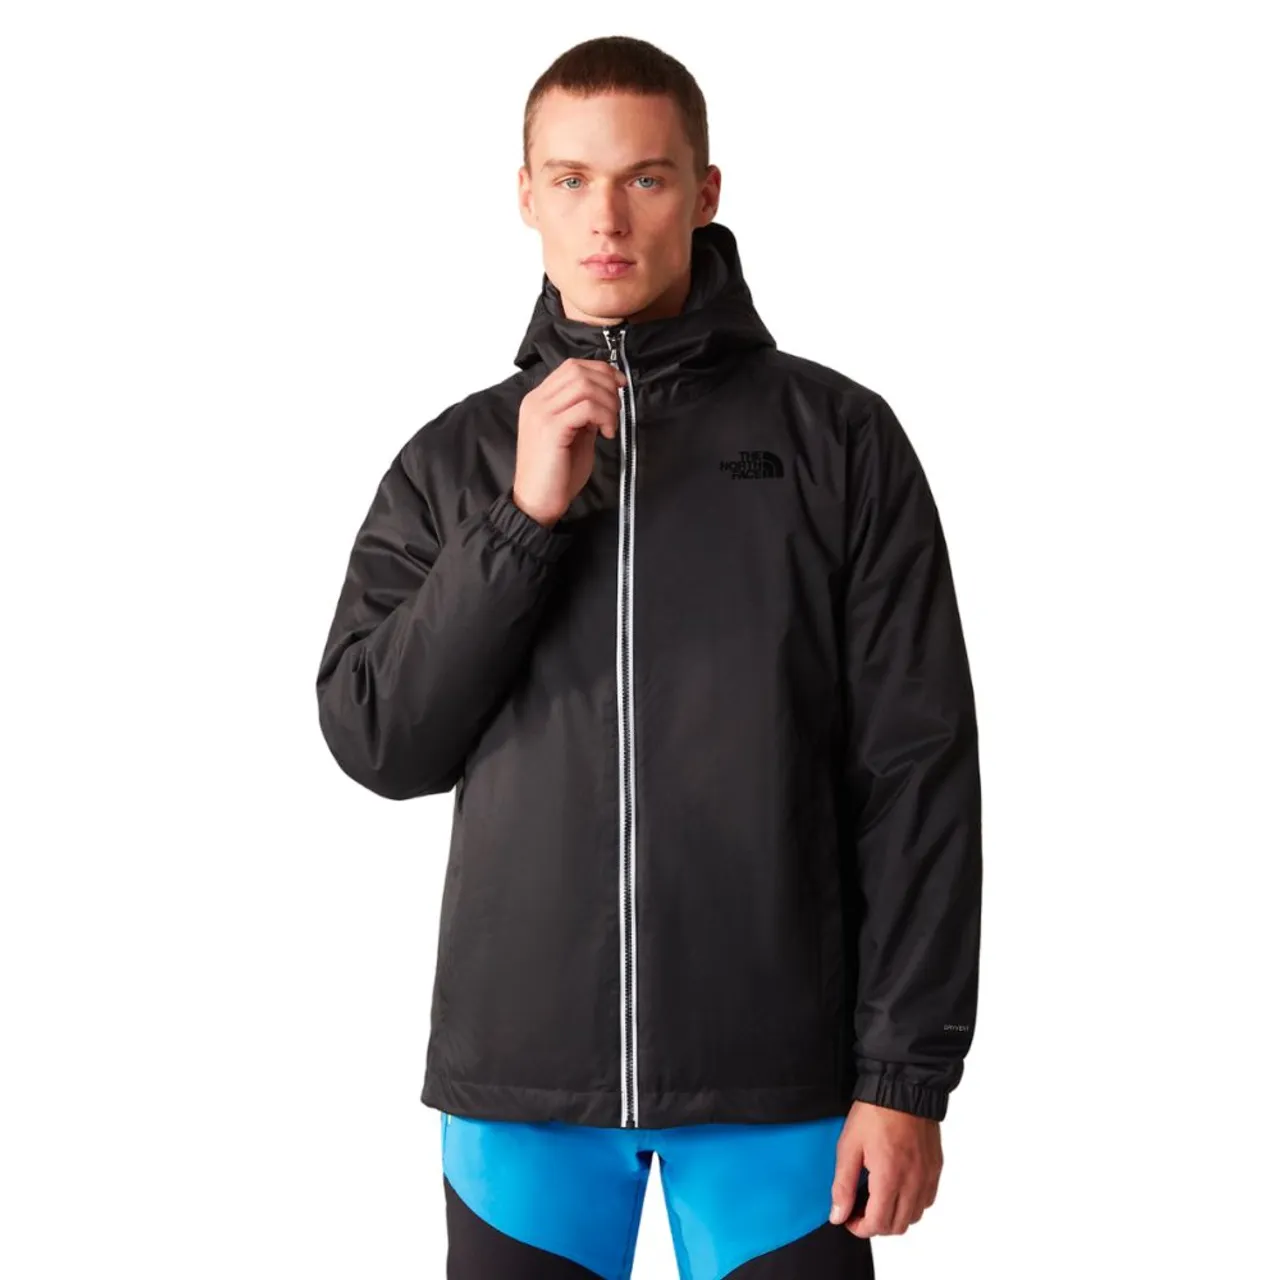 Quest Isolated Jacket Black - XL